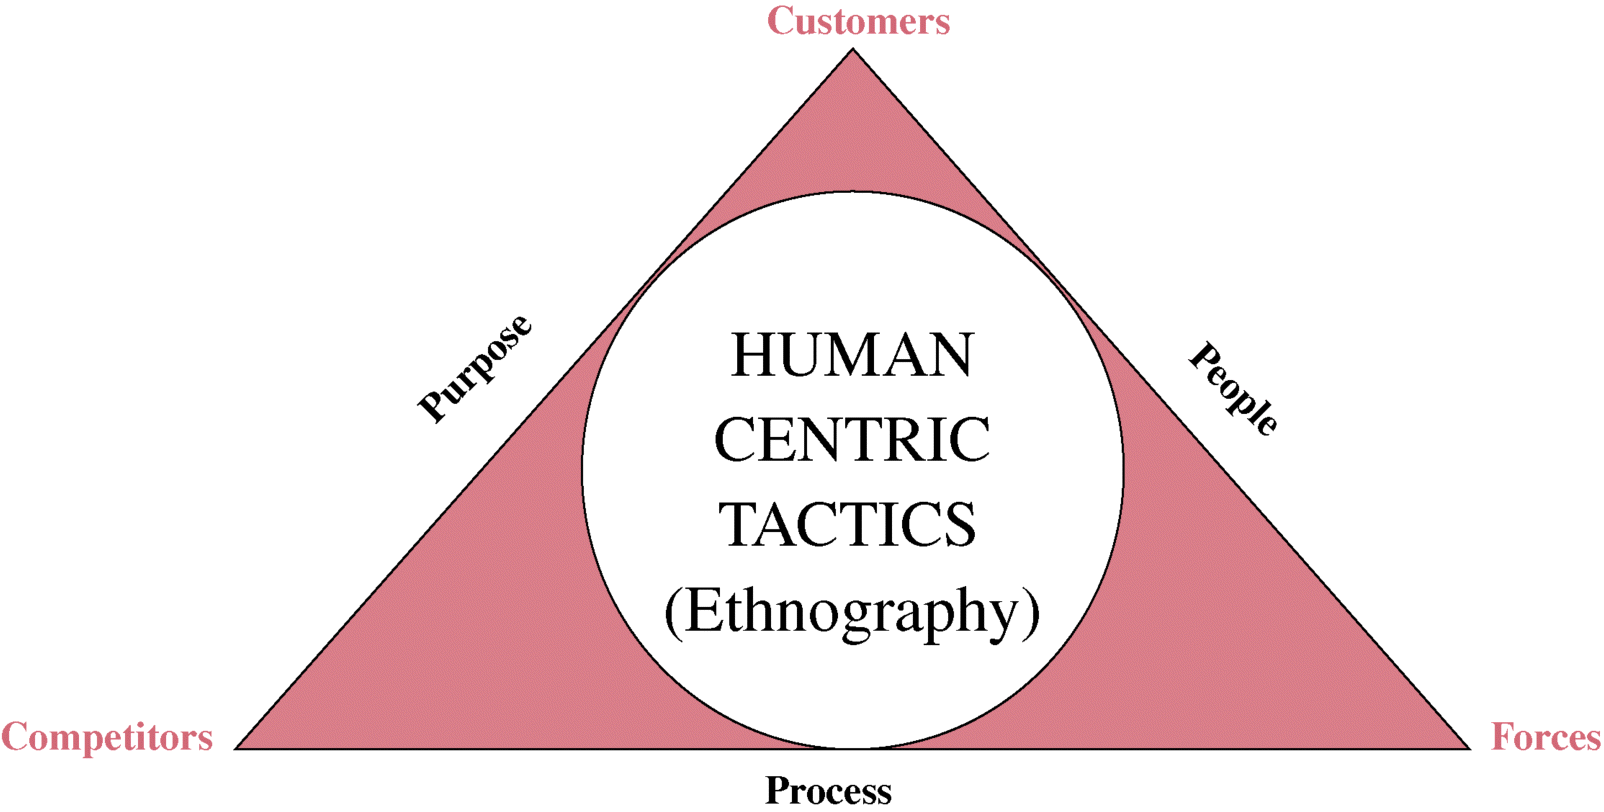 A triangle depicting the inside layer: research, where its vertex are representing customers, competitors, and forces. The sides of the triangle are representing purpose, people, and process. A circles inside the triangle is representing human centric tactics.